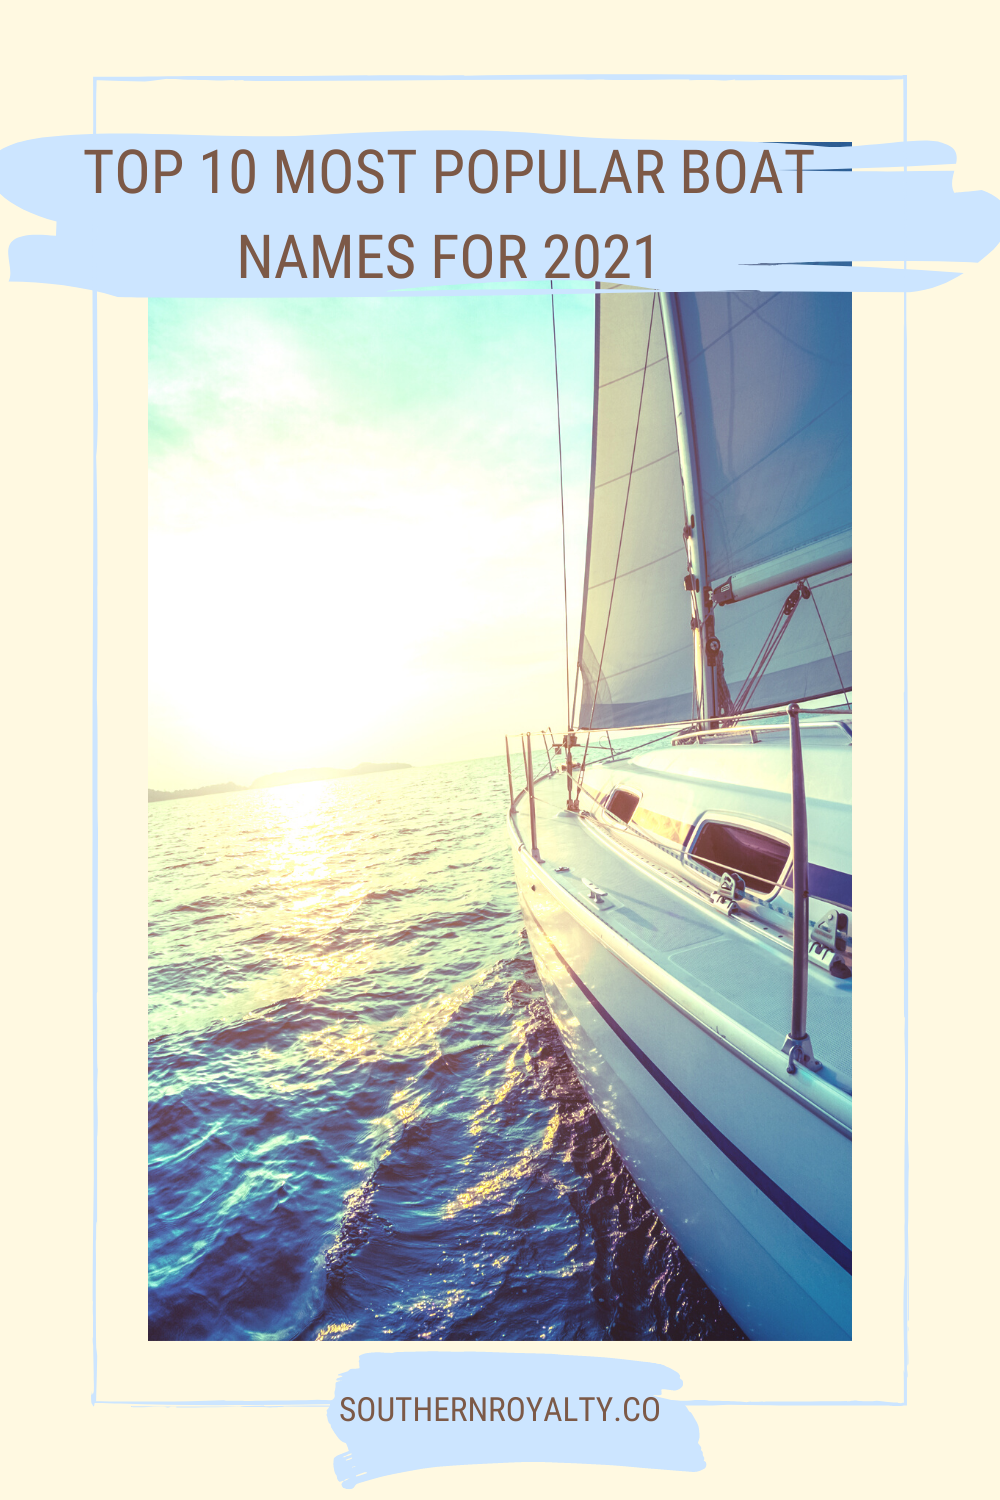 Top 10 most popular boat names for 2021